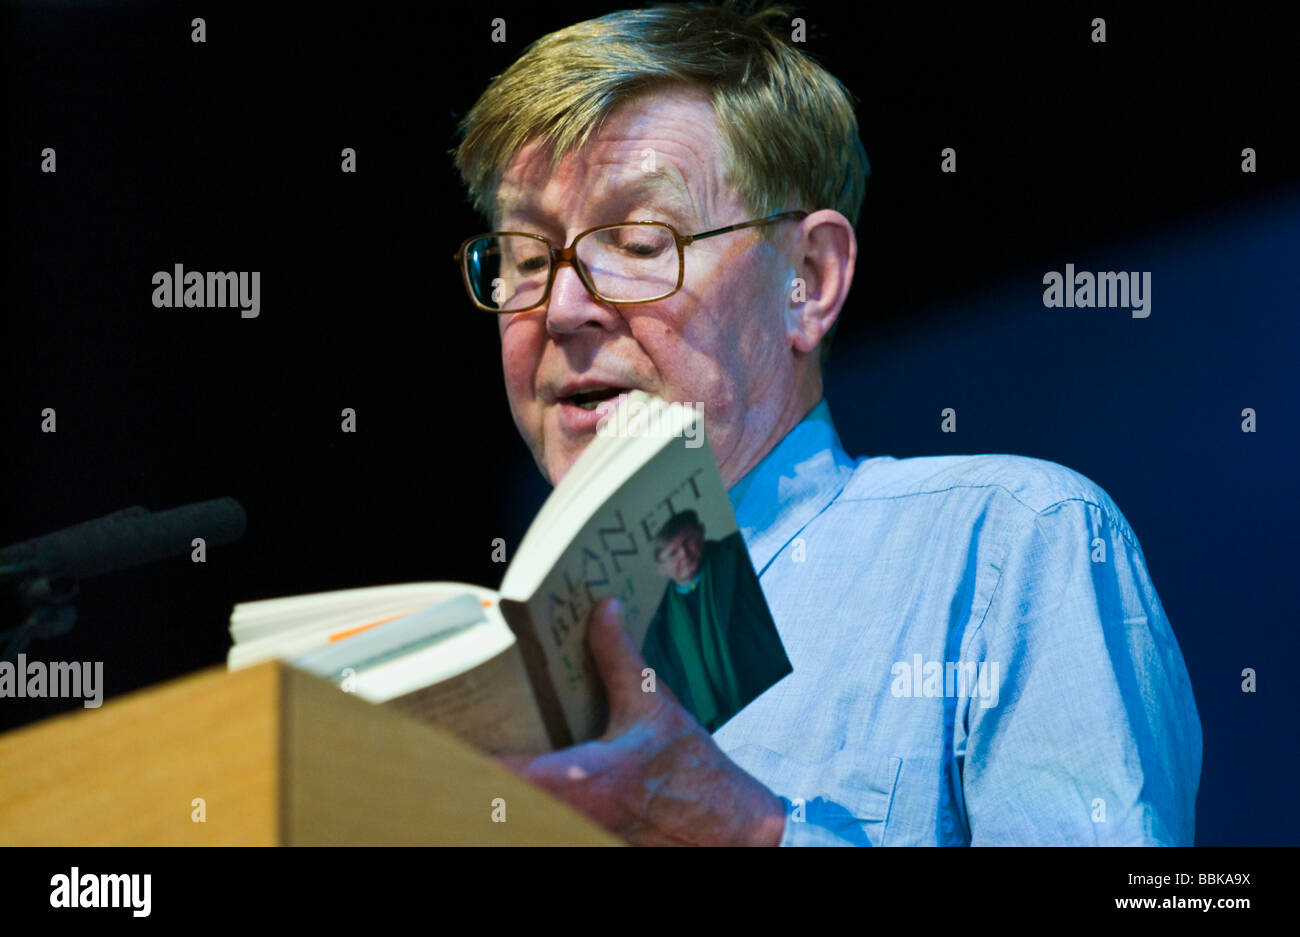 Alan Bennett diarist playwright author writer actor pictured at The Guardian Hay Festival 2009 Hay on Wye Wales UK Stock Photo